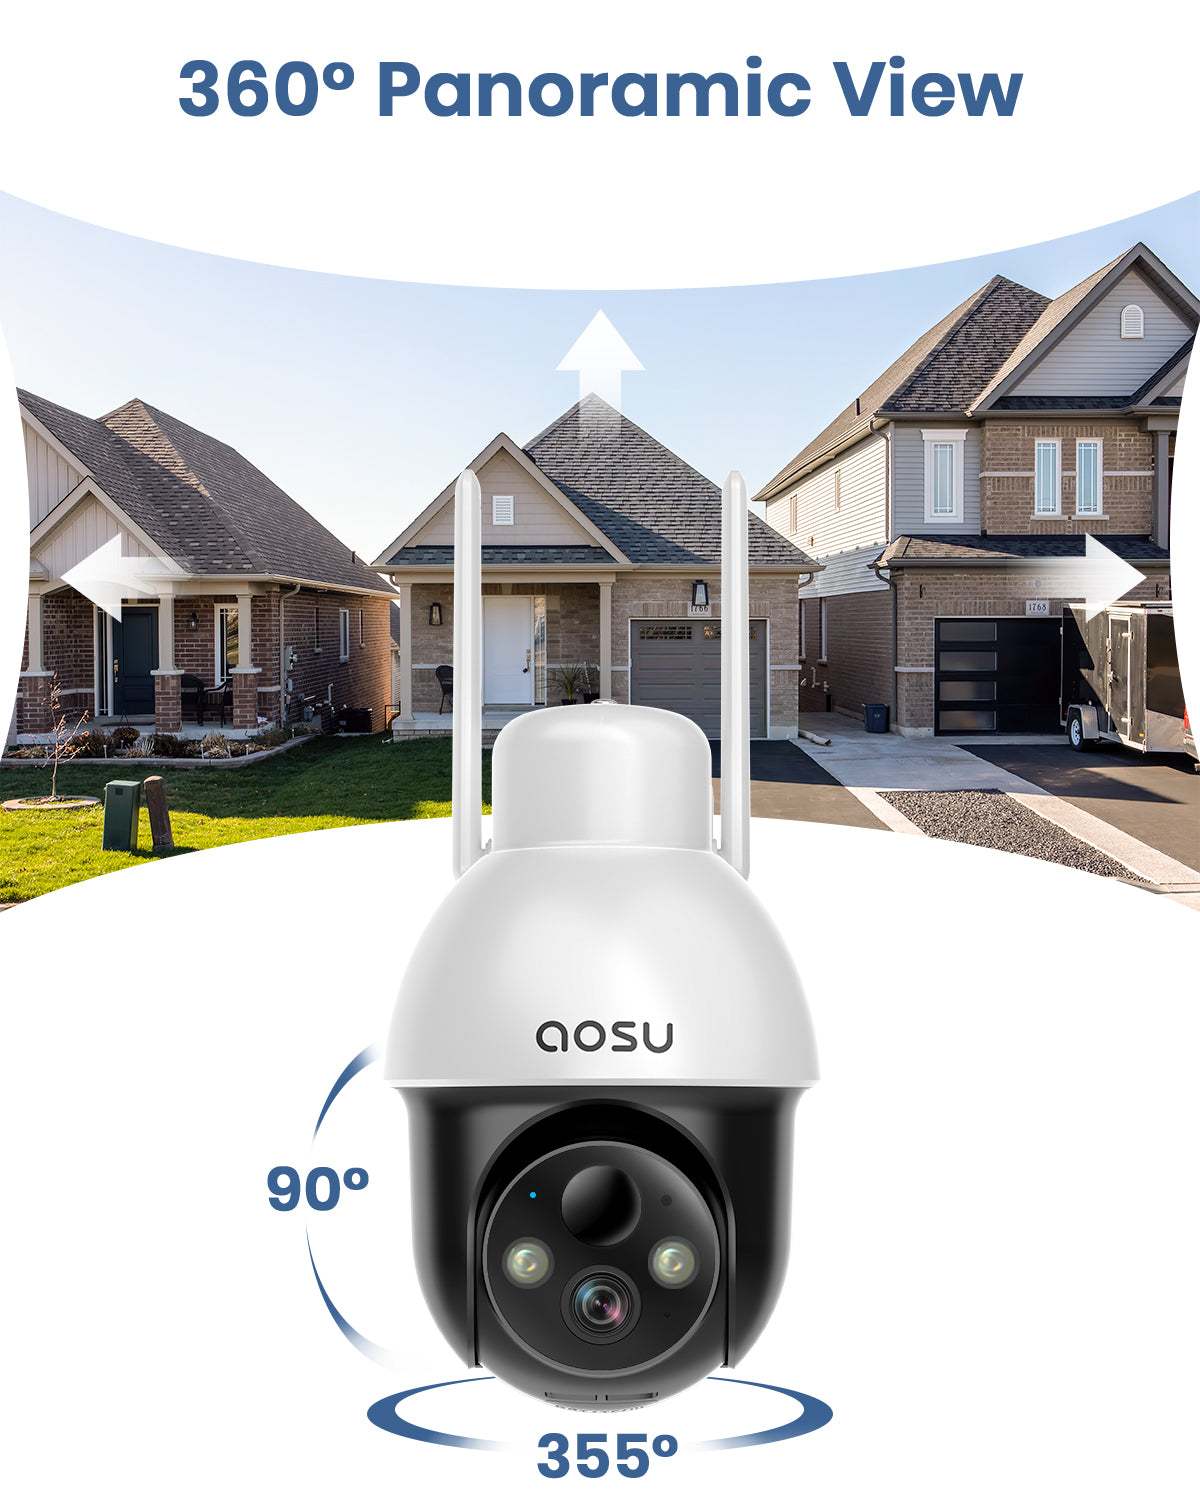 security camera features 360 degree panoramic view